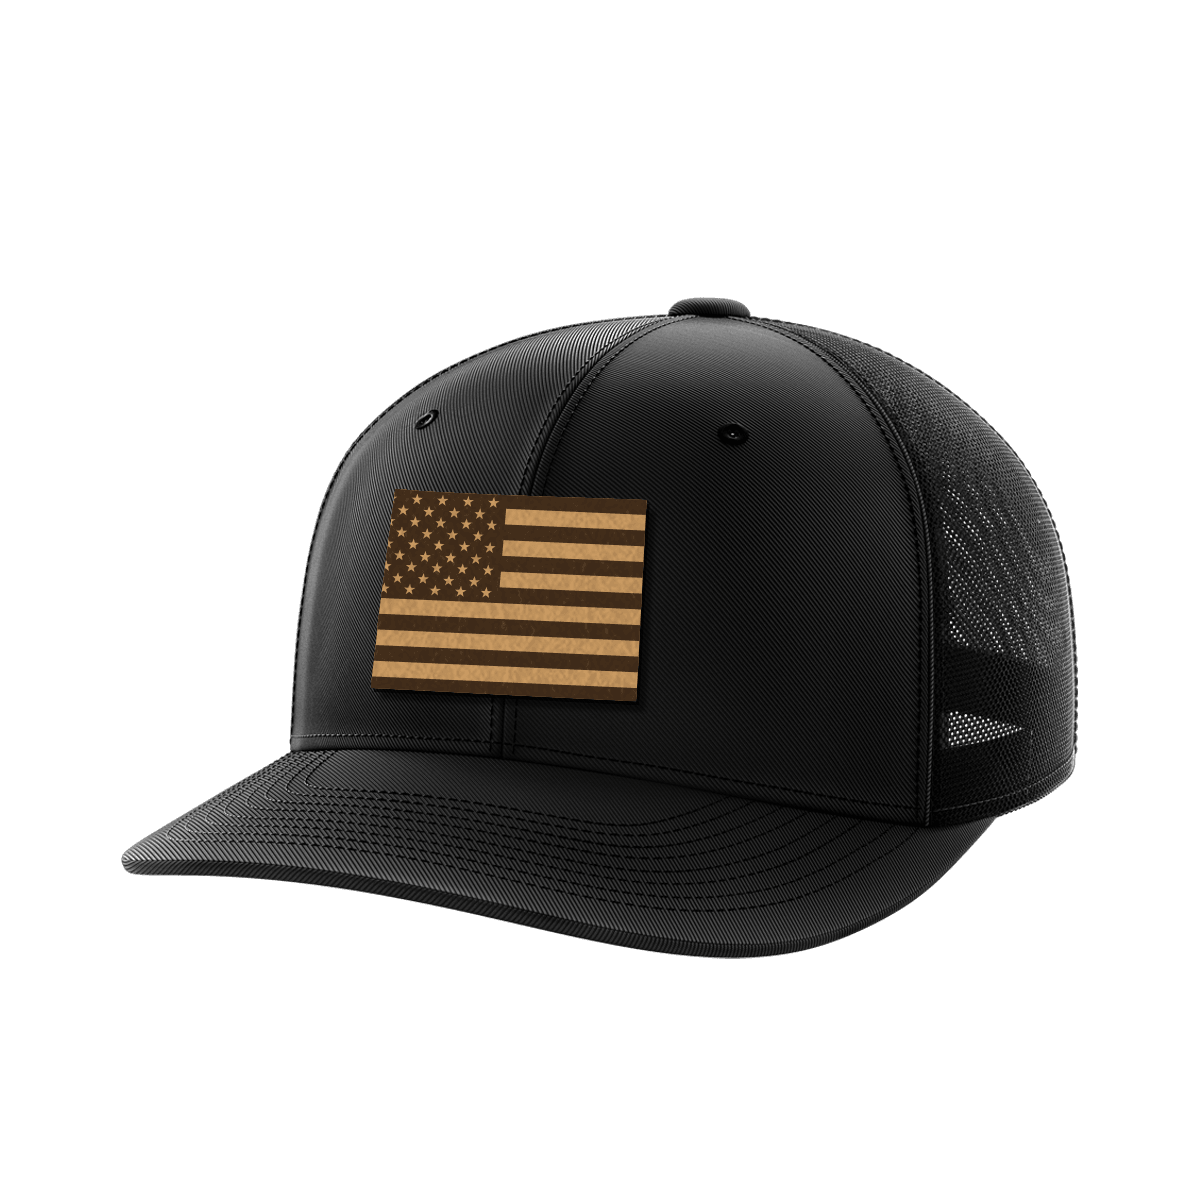 Colorado United Collection (leather) - Greater Half